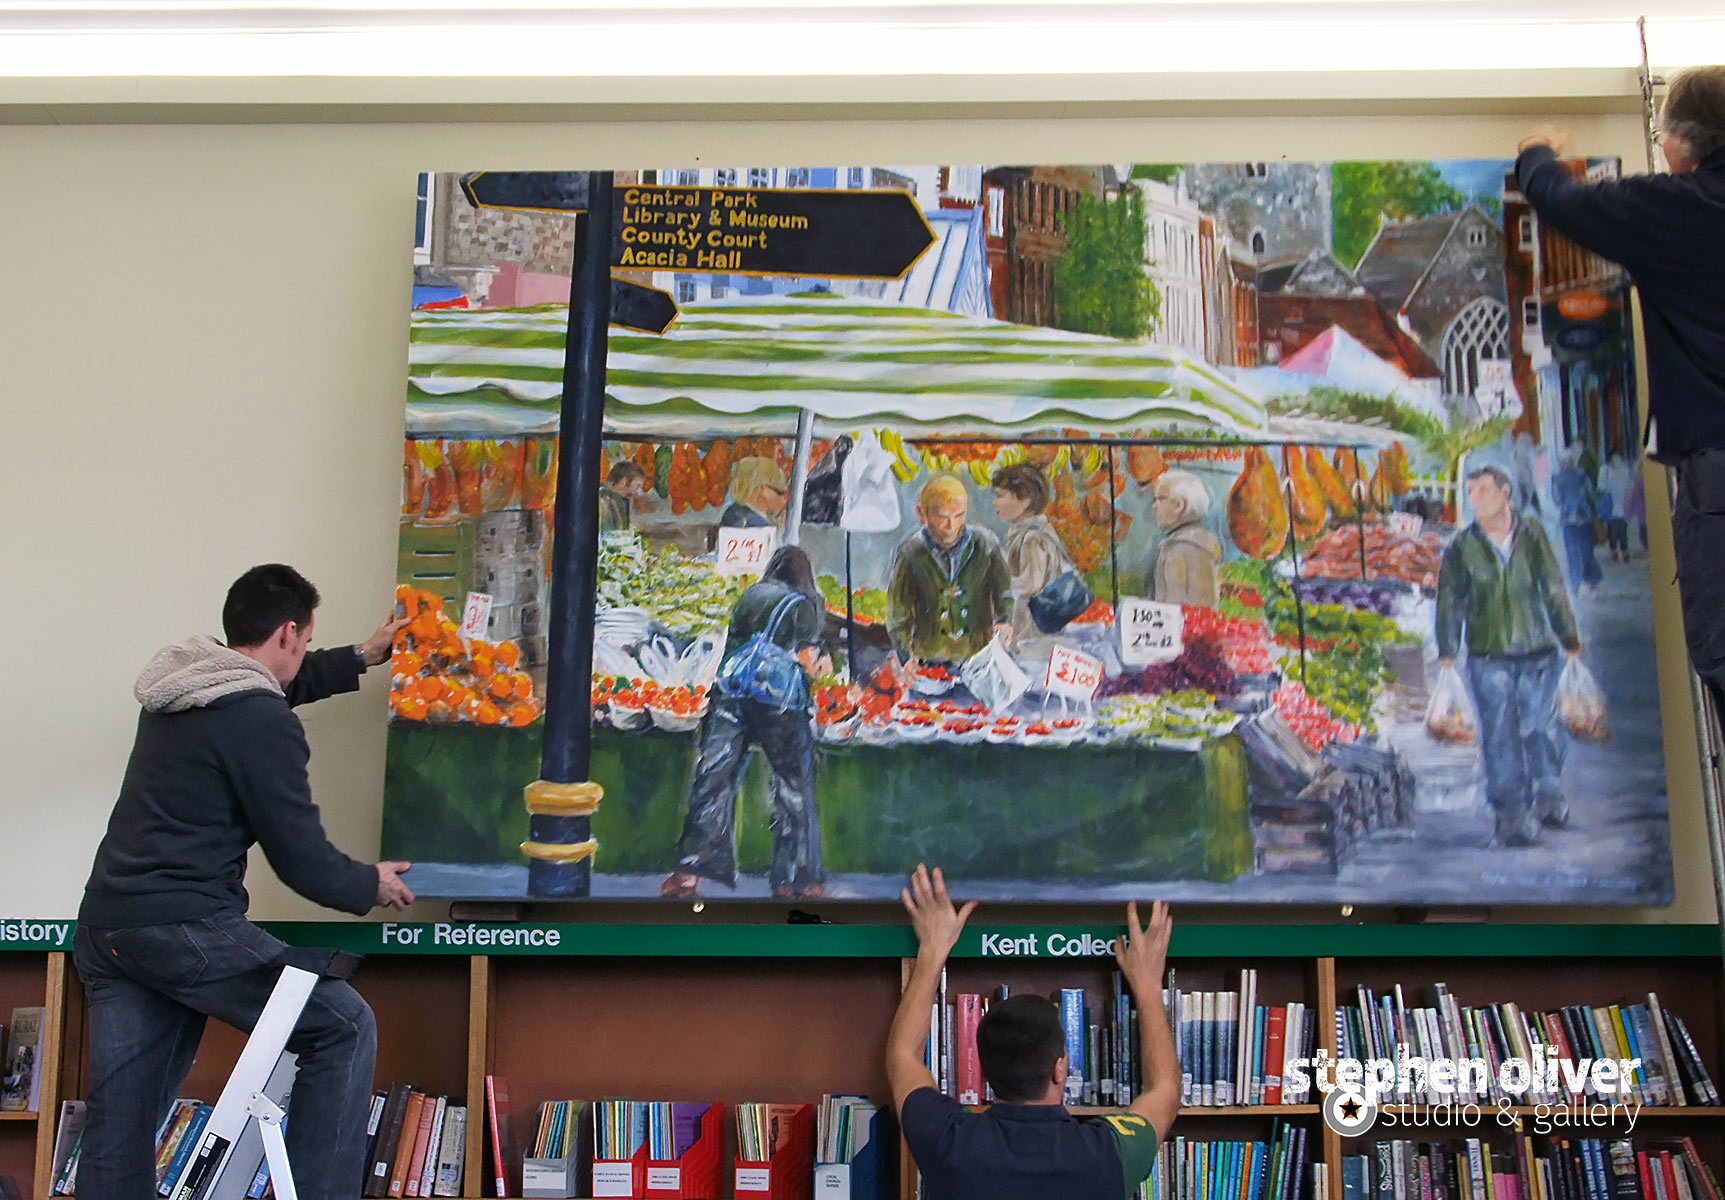 Community Art in Dartford Library Unveiled